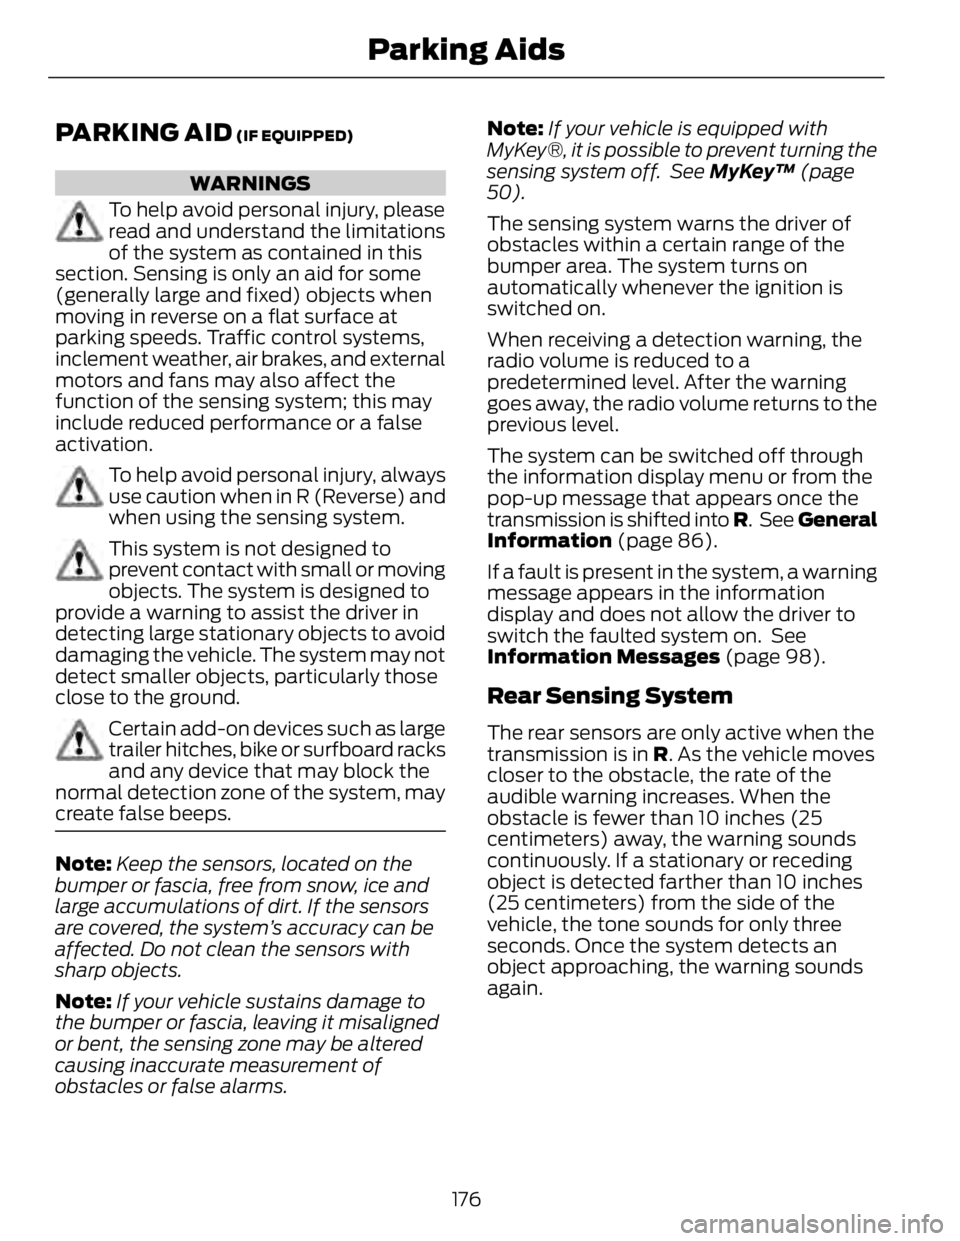 FORD FUSION HYBRID 2014  Owners Manual PARKING AID  (IF EQUIPPED)
WARNINGS
To help avoid personal injury, please
read and understand the limitations
of the system as contained in this
section. Sensing is only an aid for some
(generally lar